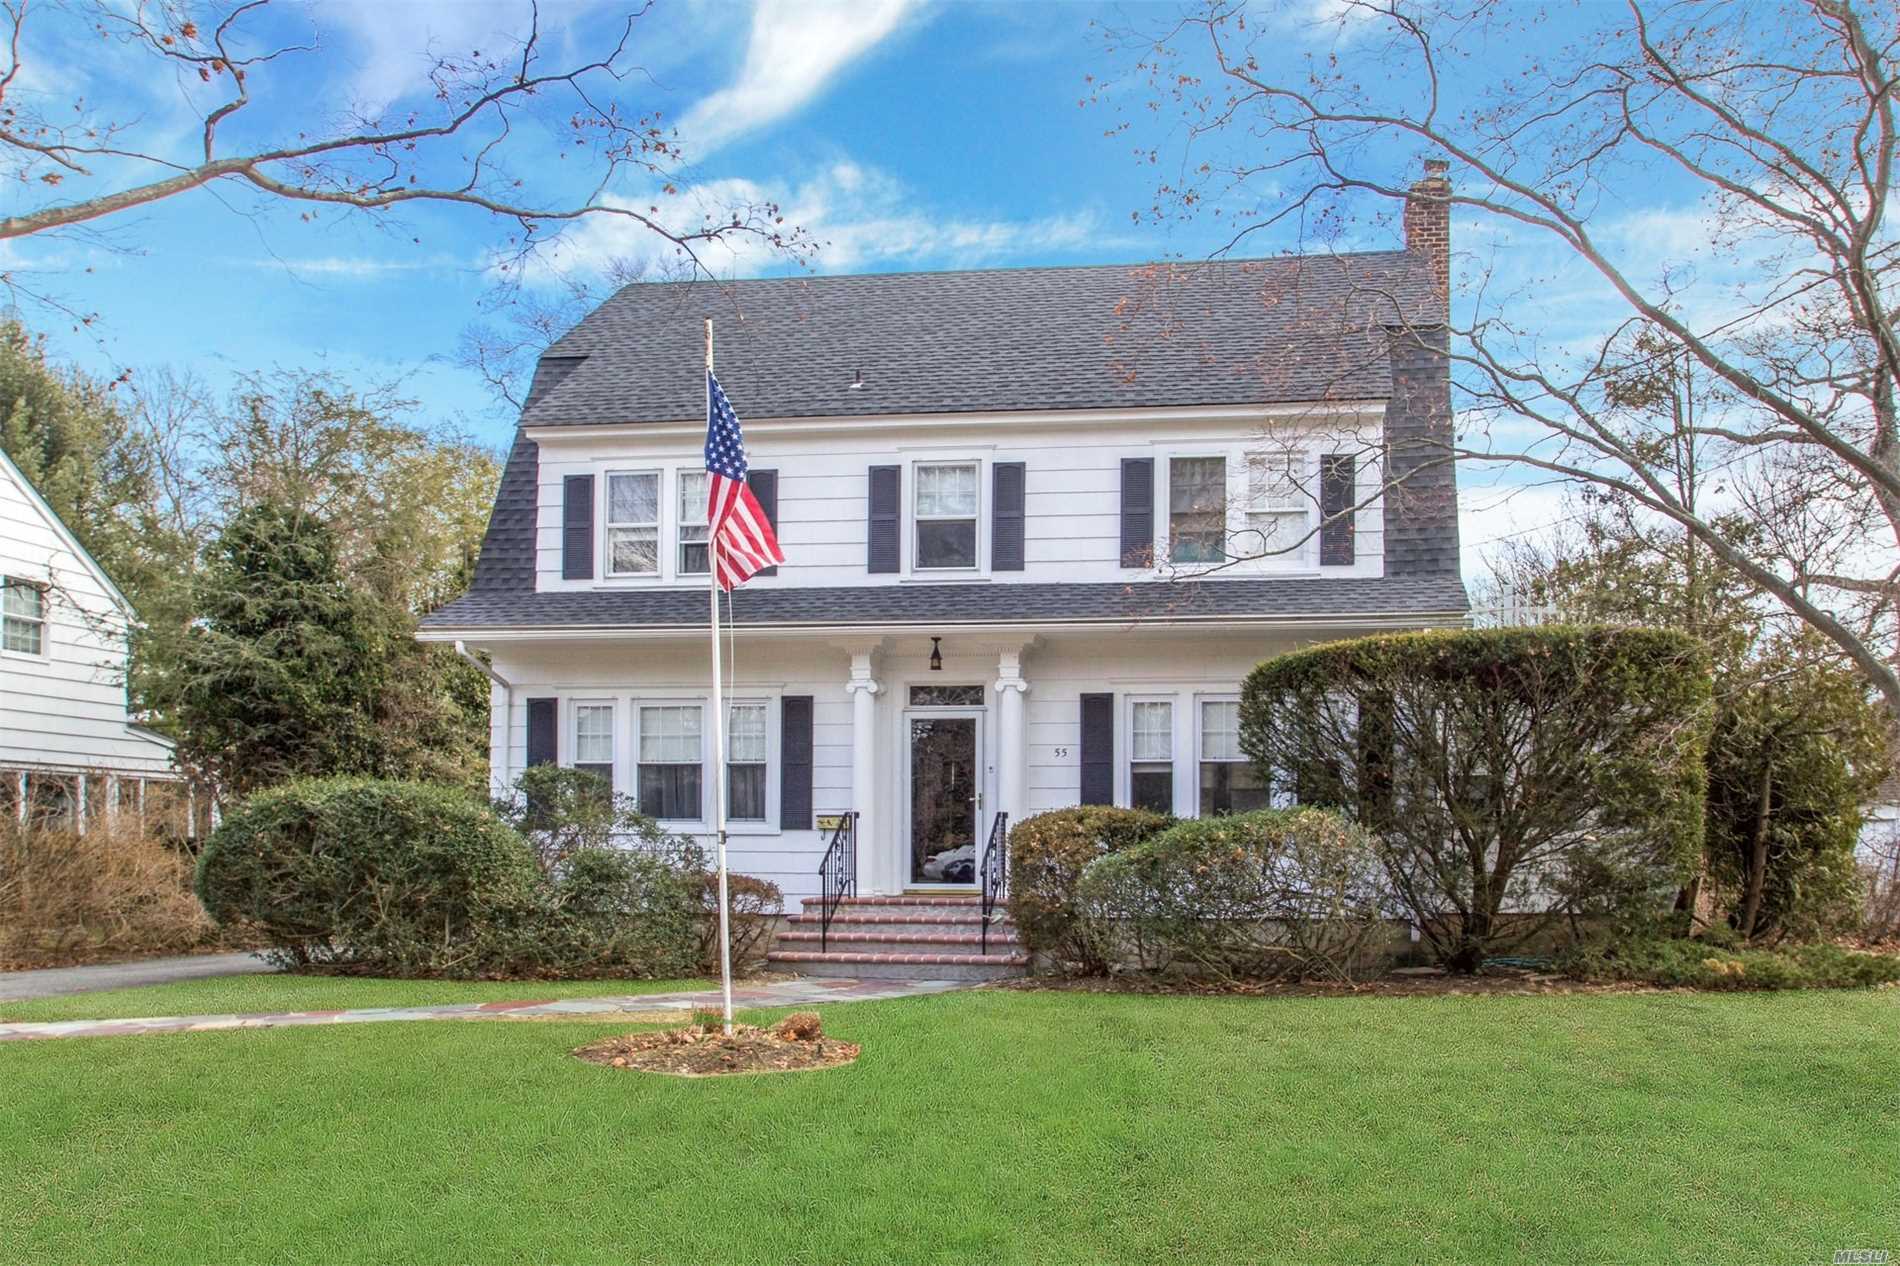 Classic Dutch Colonial In The Lakes Section. New Exterior Paint And Shutters, Ch, Flr W/Fp, Fdr, Eik W/Bkfast Nook, Sunrm, 6 Bdrms 2.5 Baths, 1.5 Set Garage, Amazing Location! Village Docking, Tennis, Beach, Parks, Snow Removal & Code Enforcement.